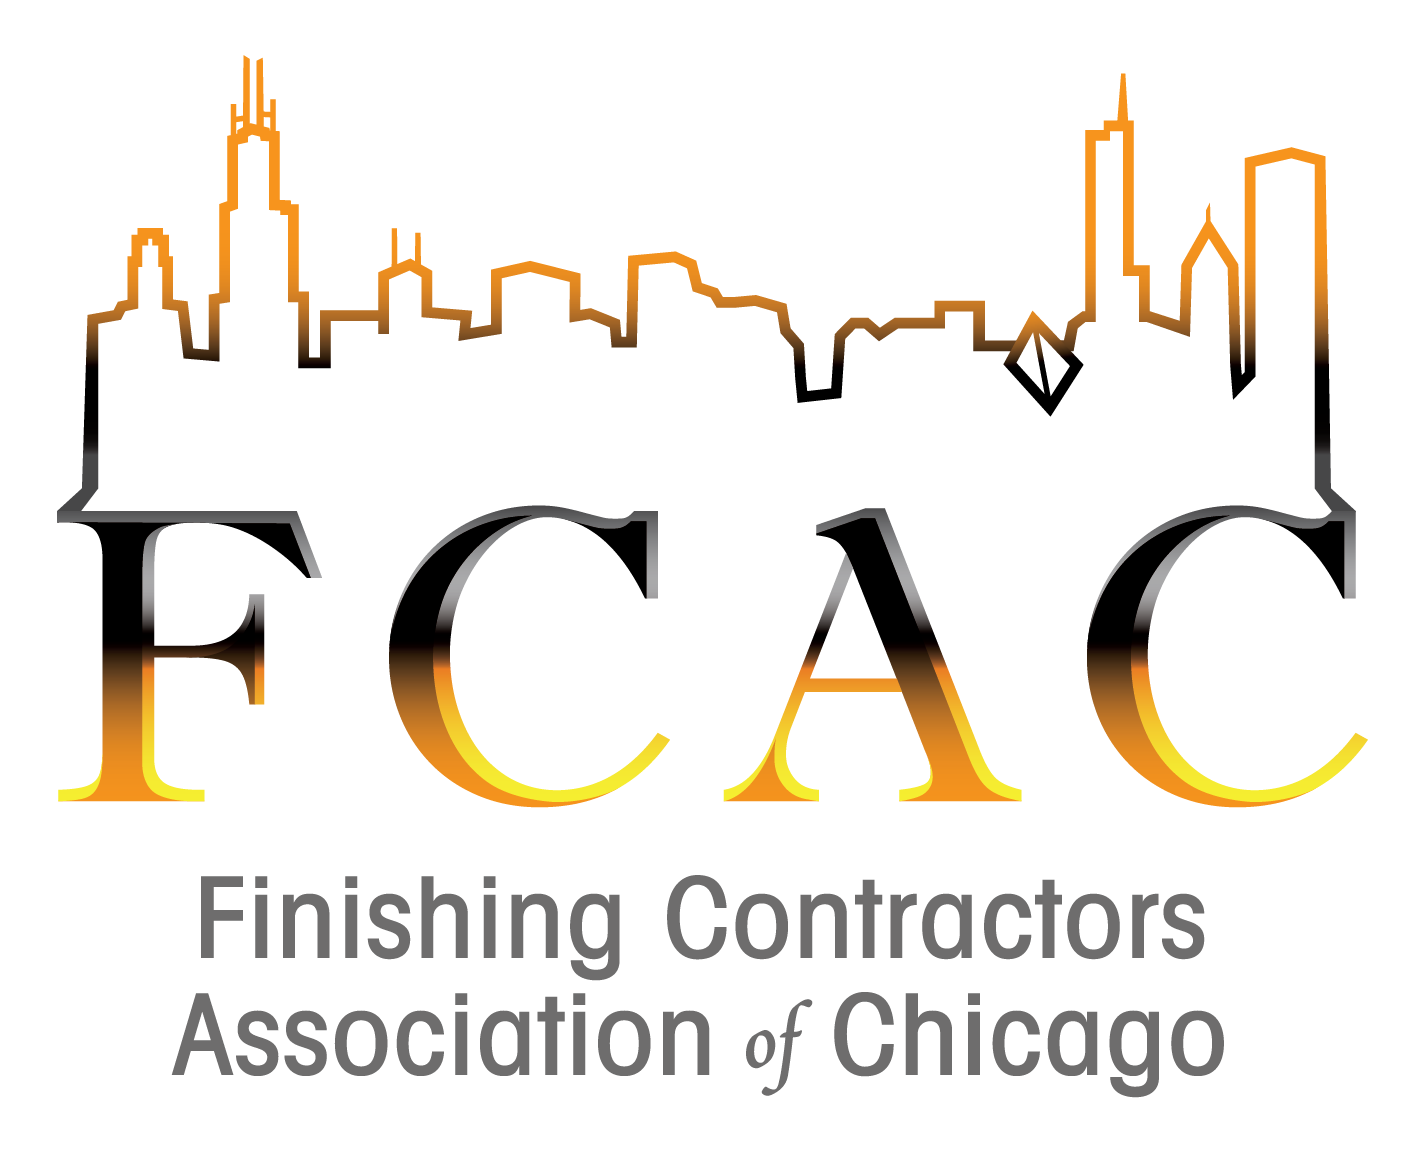 Finishing Contractors Association of Chicago